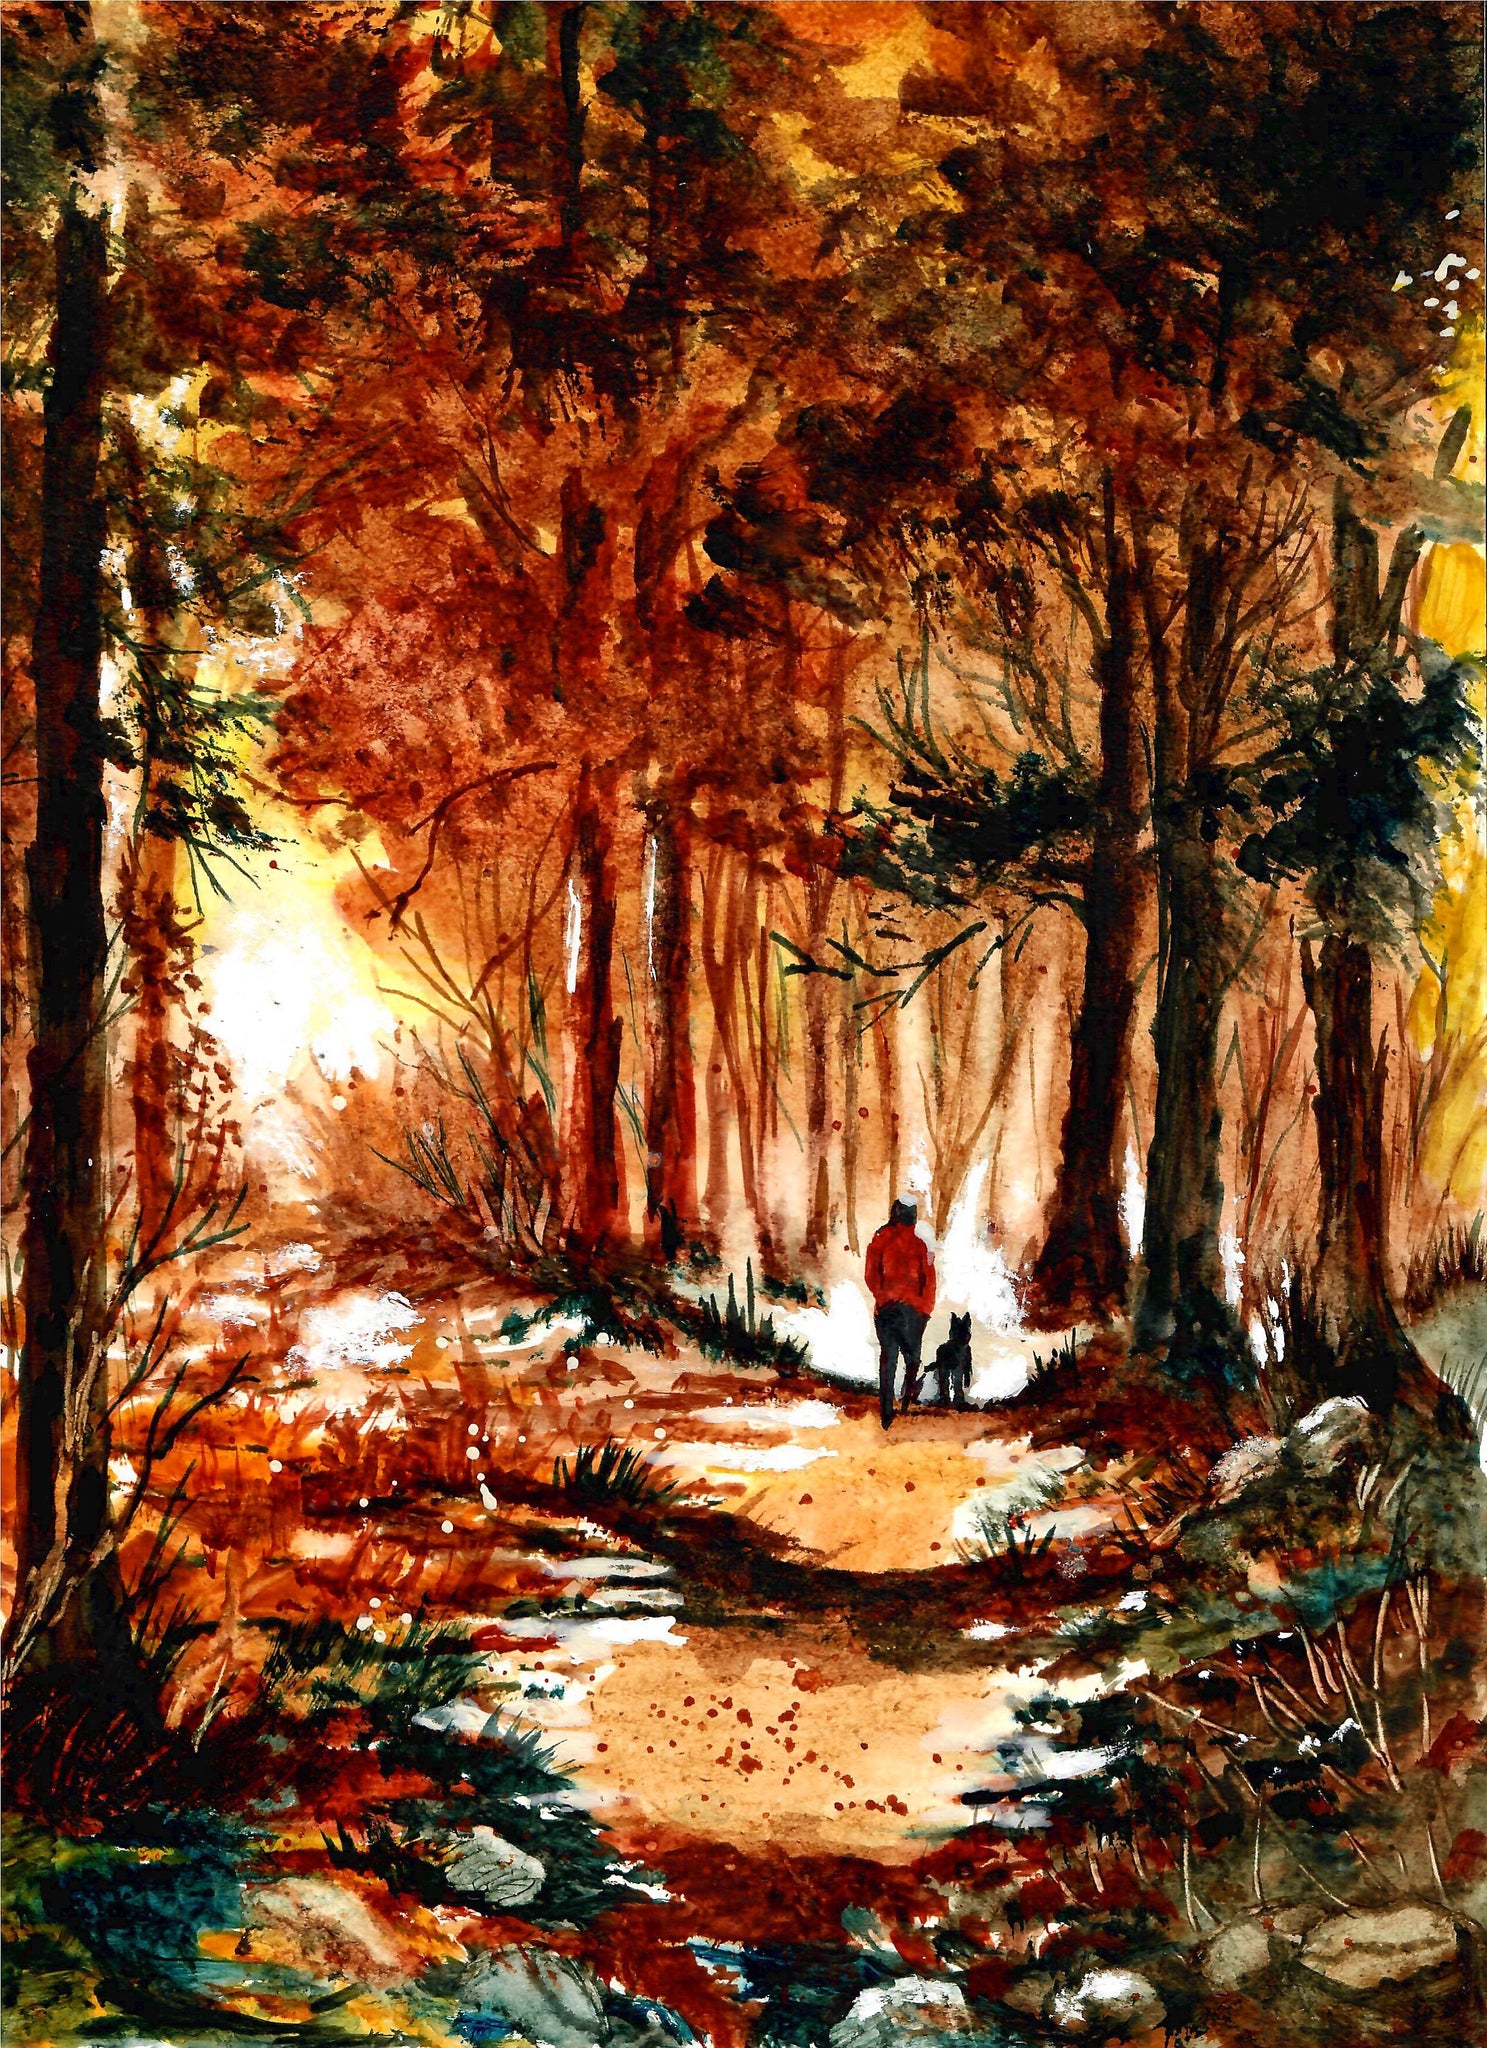 Nature - Man And Dog In Woods, Forest Art, Sunlit Woods, Forest Pathway, Landscape Art